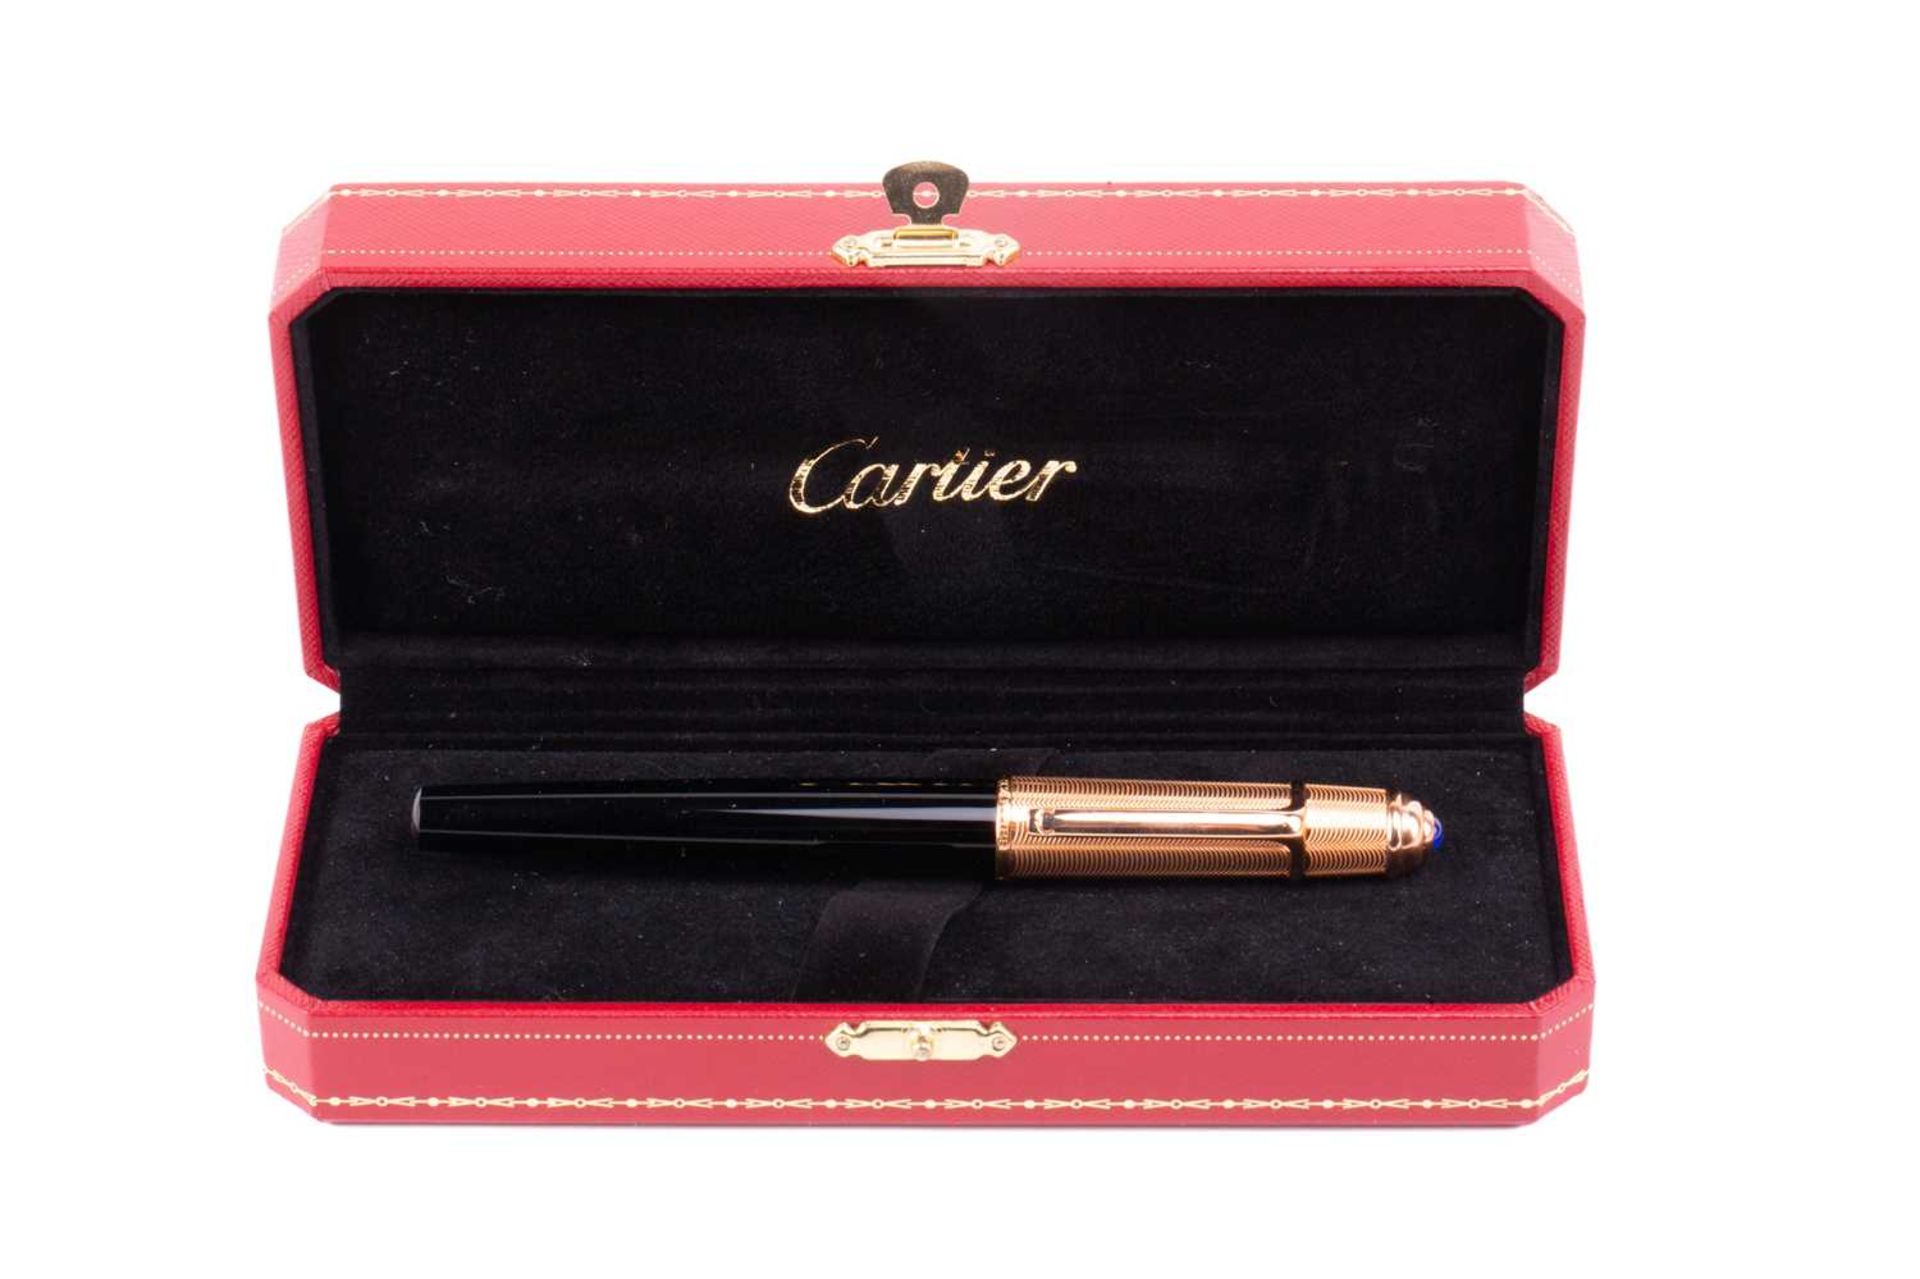 Cartier - A black composite rollerball pen with rose gold plated screw cap with blue glass - Image 5 of 8